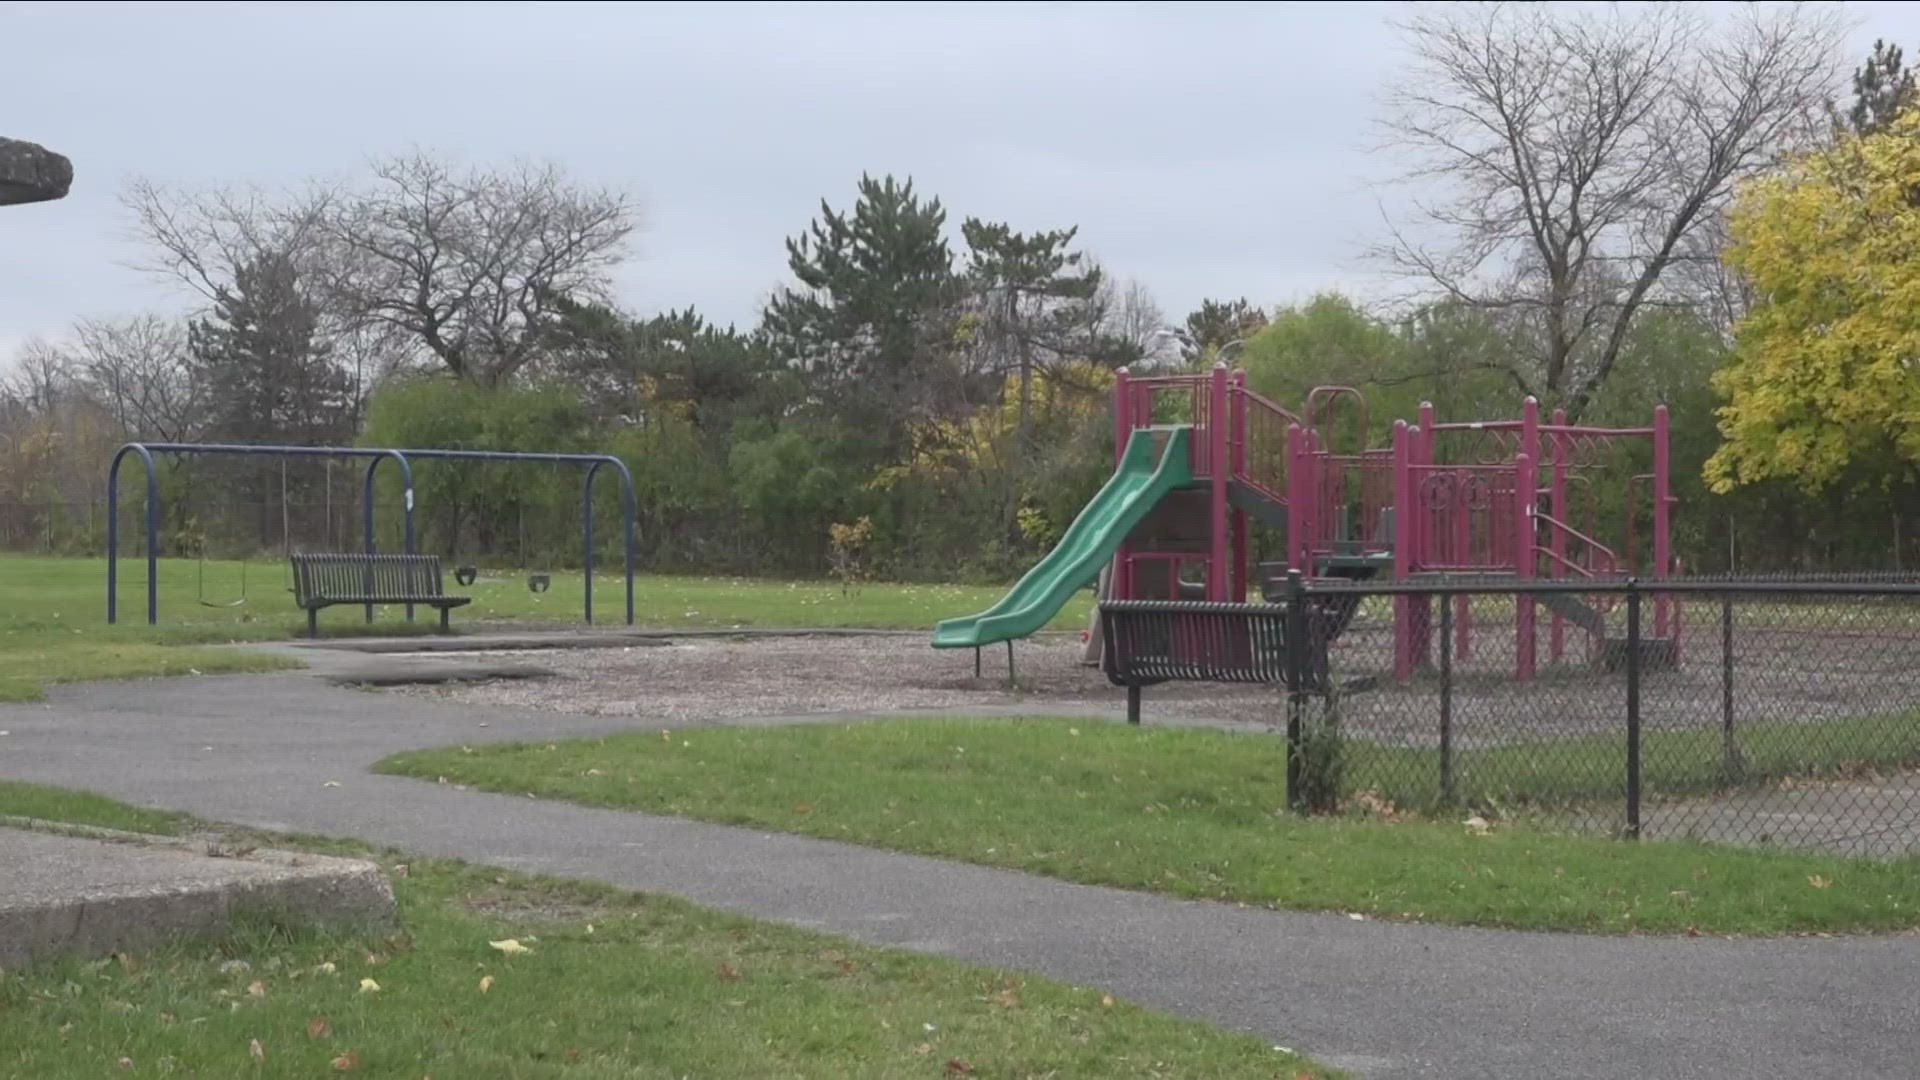 $2 million will go to revitalize Roosevelt Park on the city's East Side